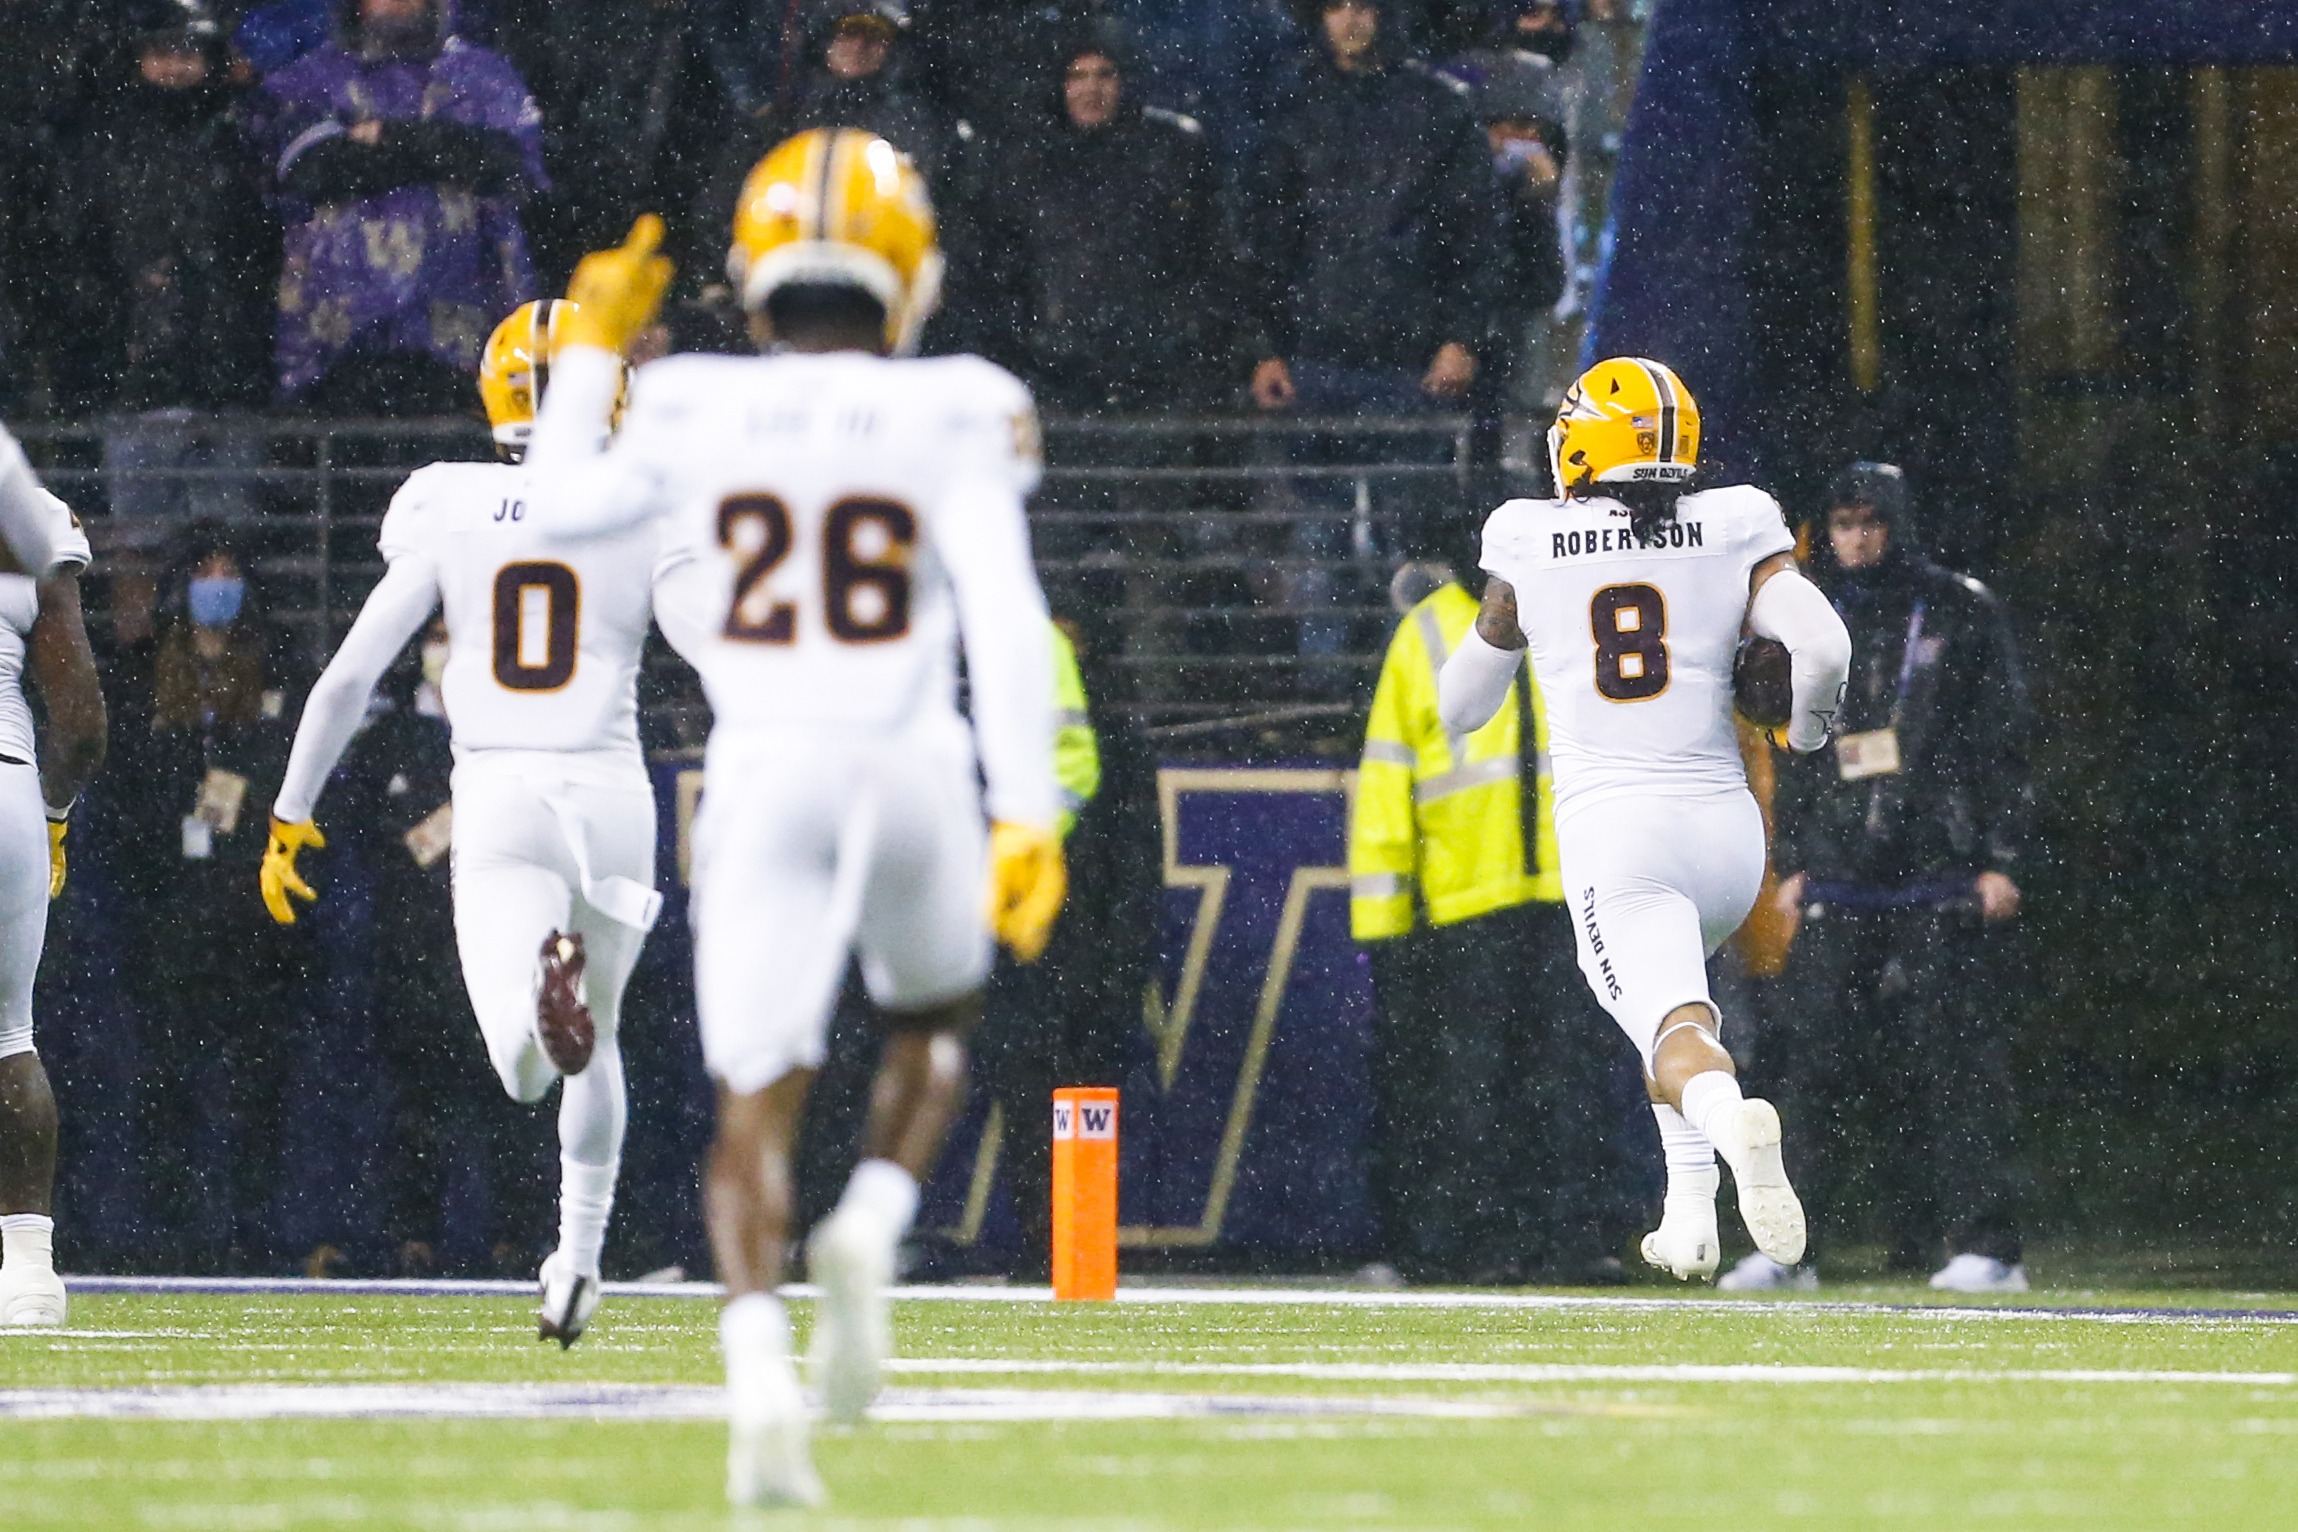 Arizona State Sun Devils defensive back Merlin Robertson returns an interception for a touchdown late in the game to seal the win for ASU. 